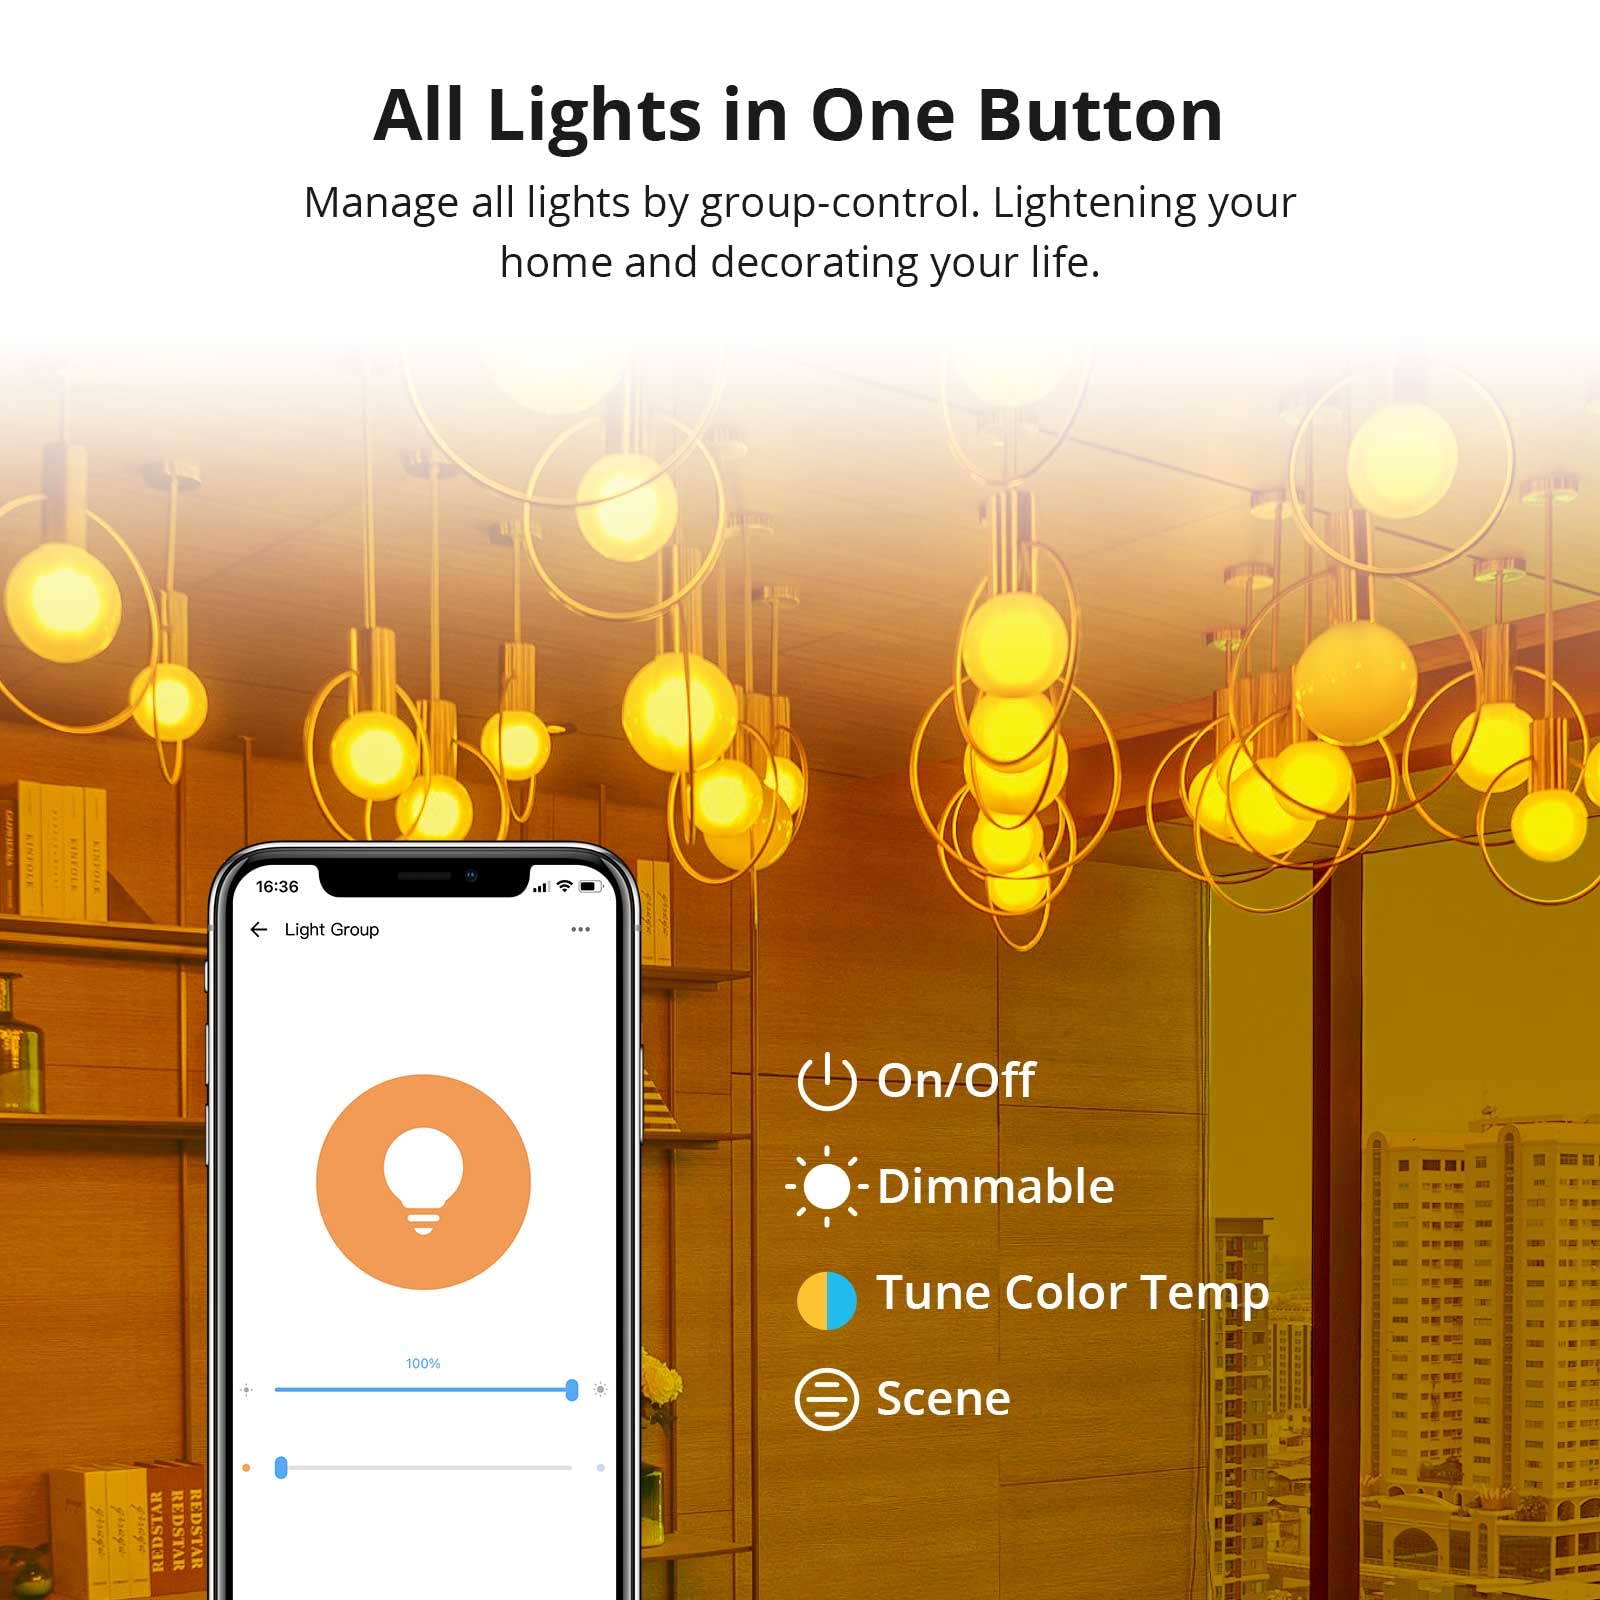 SONOFF B05-BL-A19 Wi-Fi Smart RGB Bulb 9W Variable Color, 2700K - 6500K Brightness Adjustable Color Temperature, APP Remote Control, Work with Alexa and Google Assistant (1 Pack)